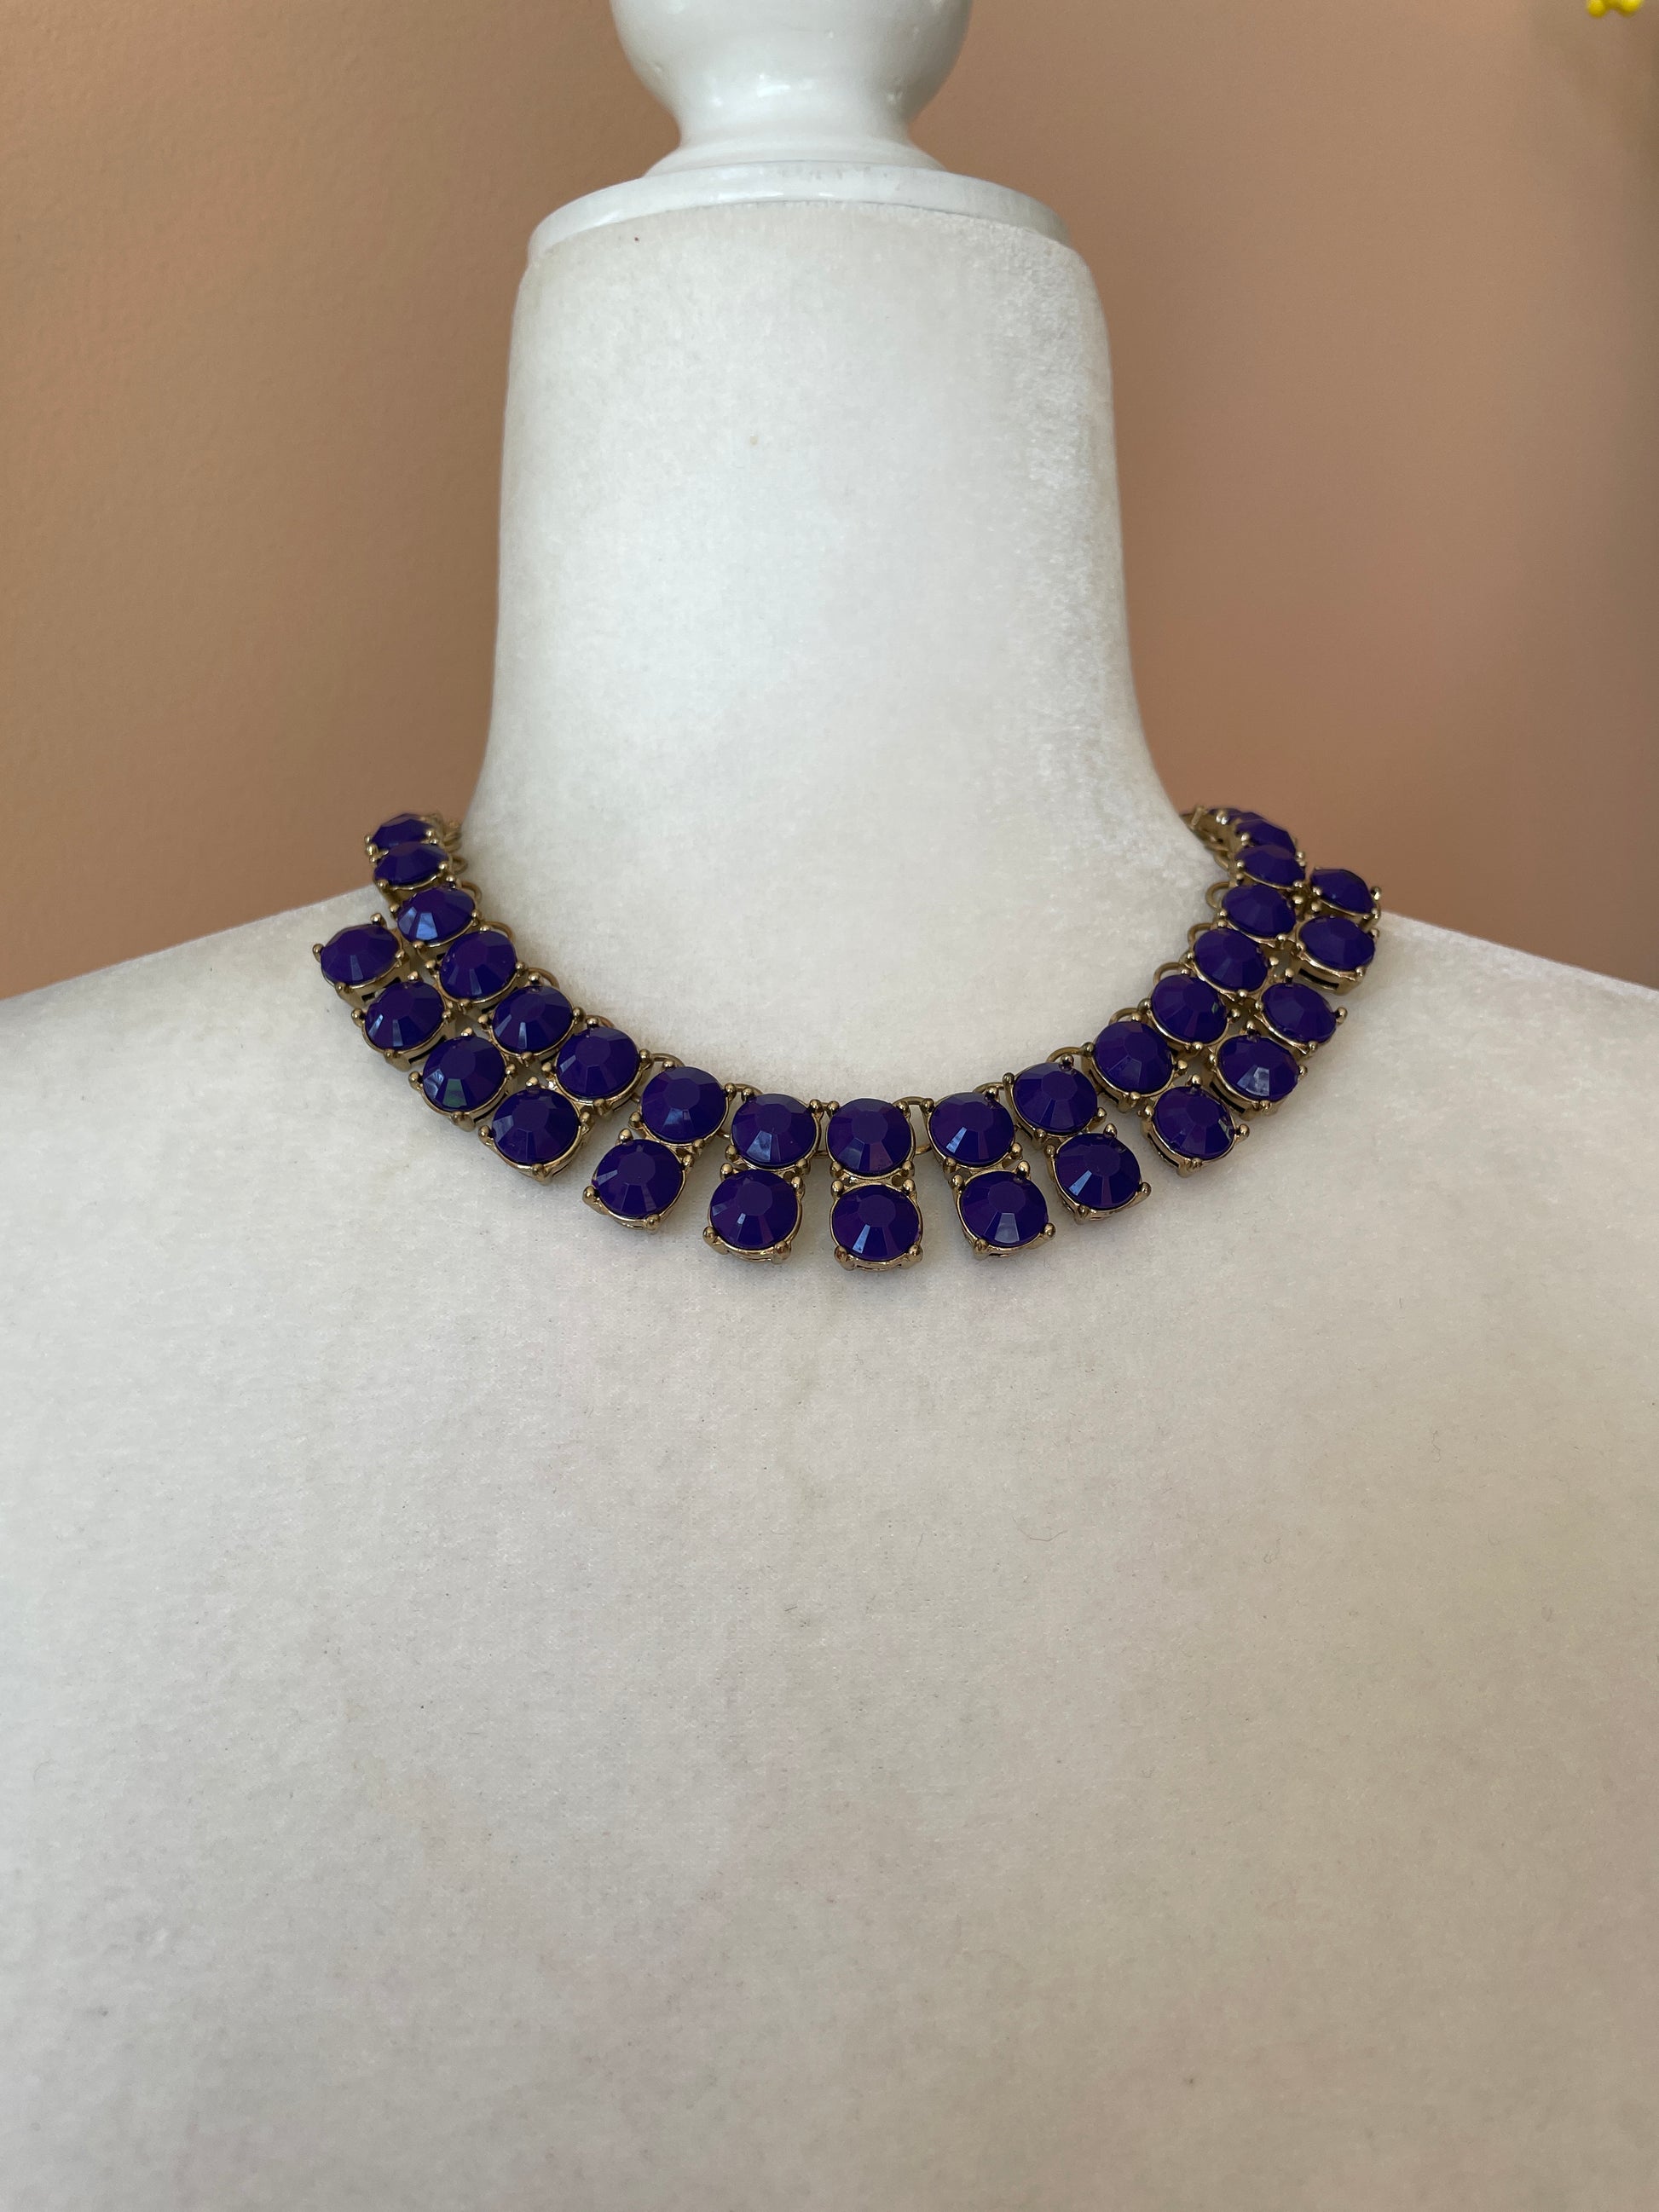  90s Gold Tone Purple Glass Beads Classic Necklace